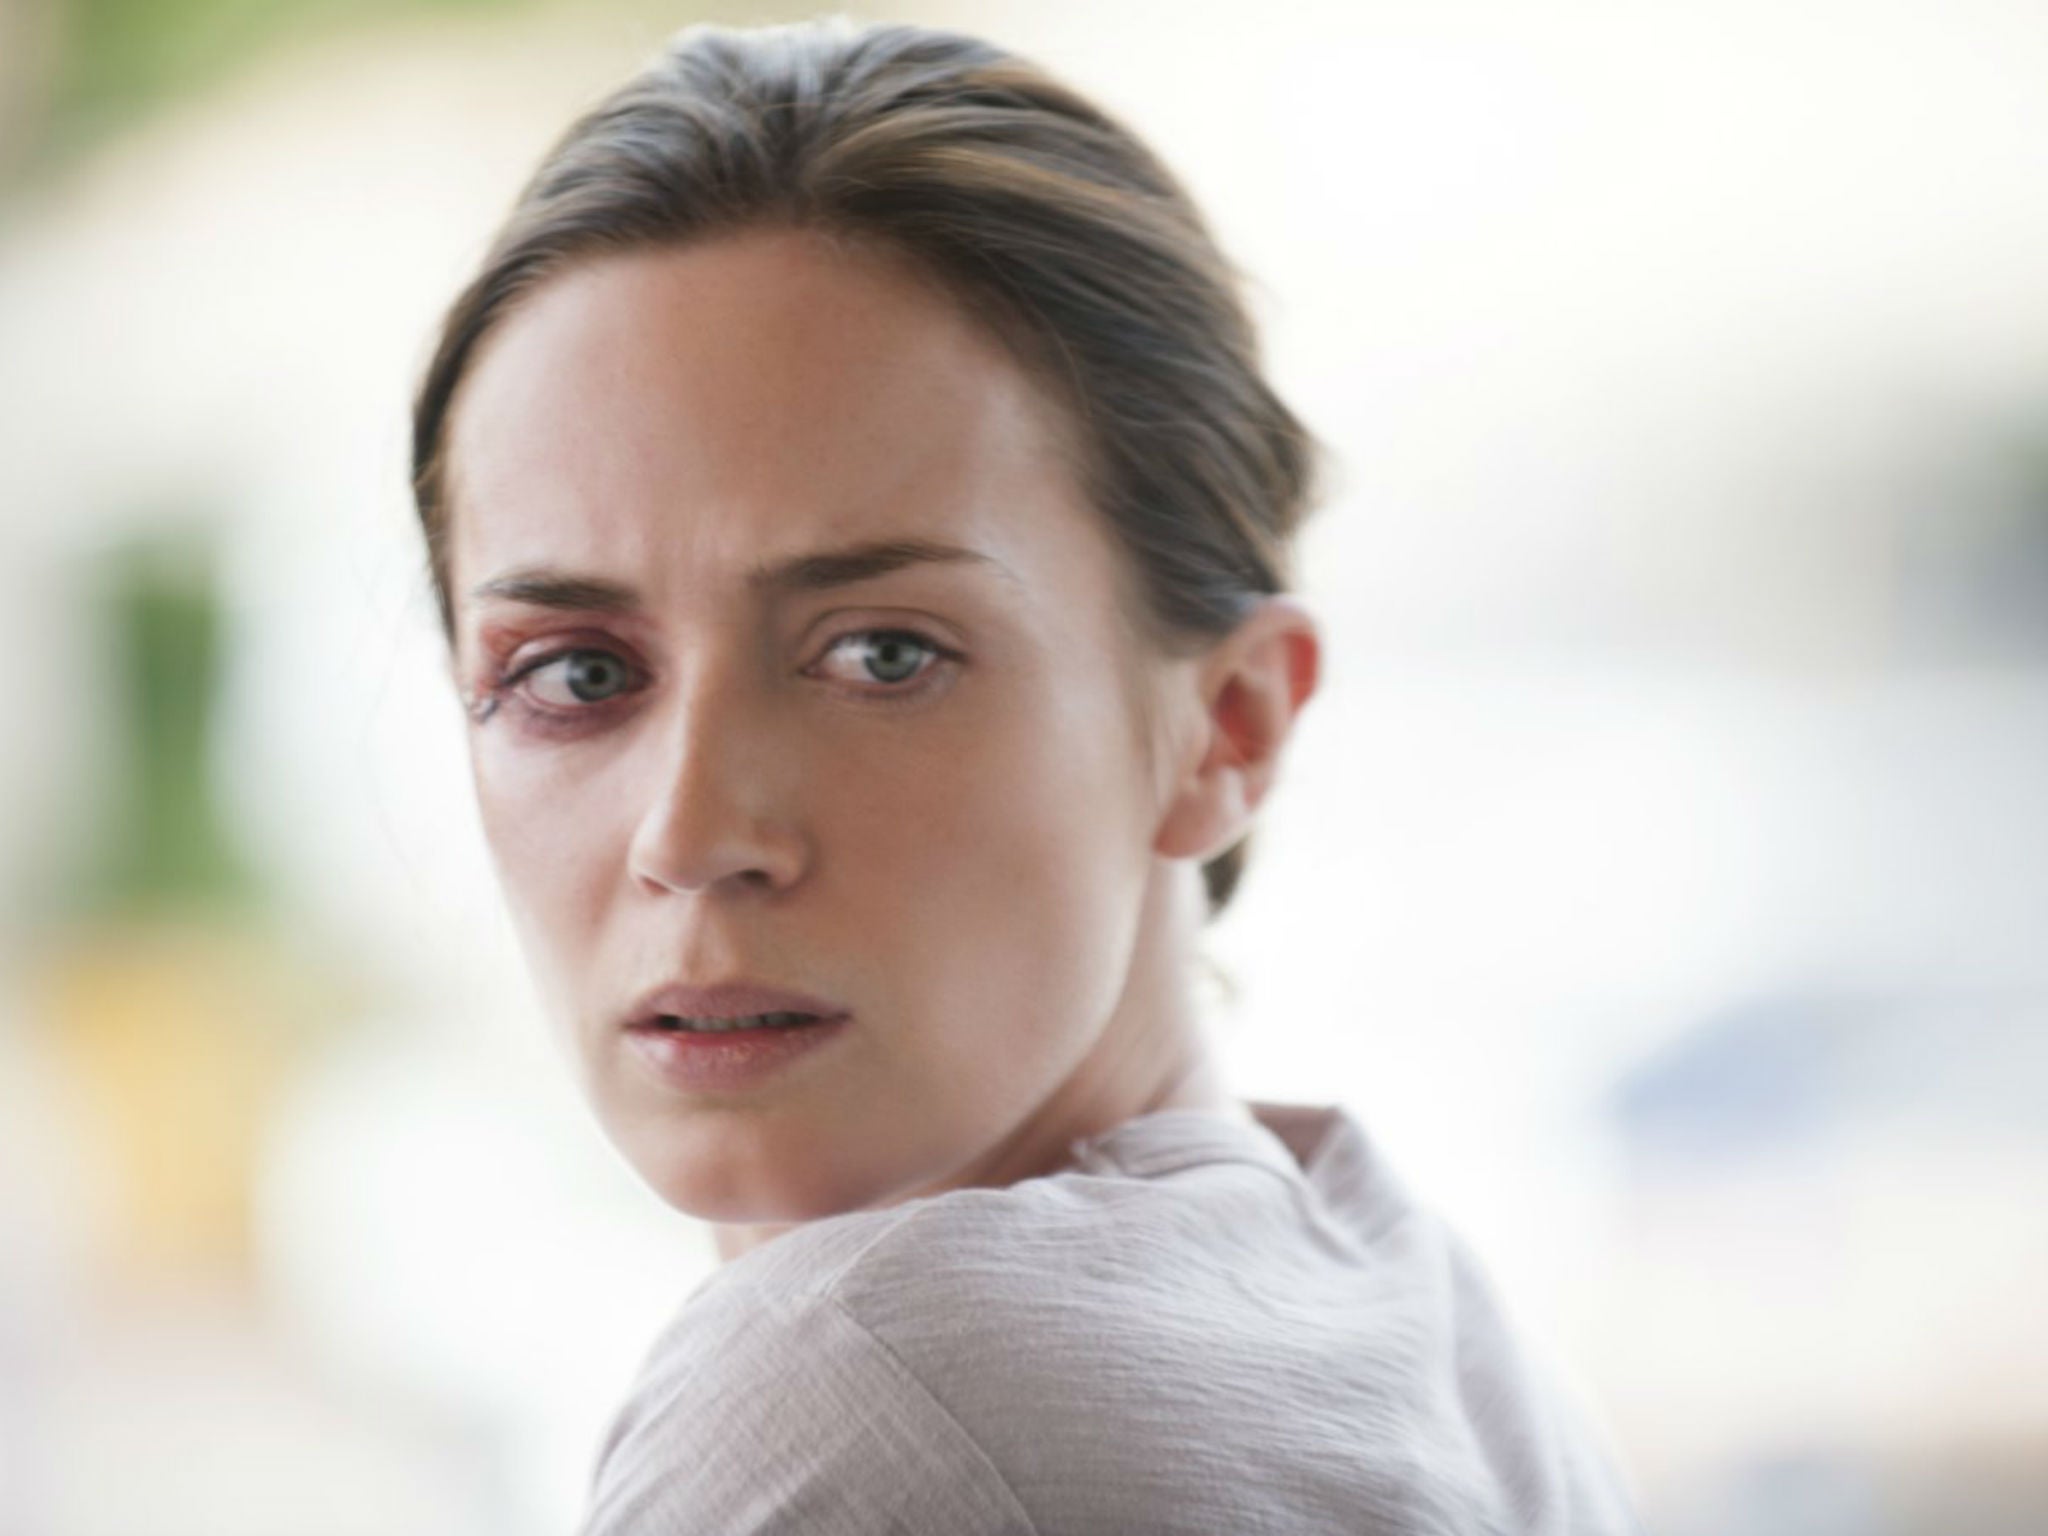 Emily Blunt heads up the Sicario cast as FBI agent Kate Macer